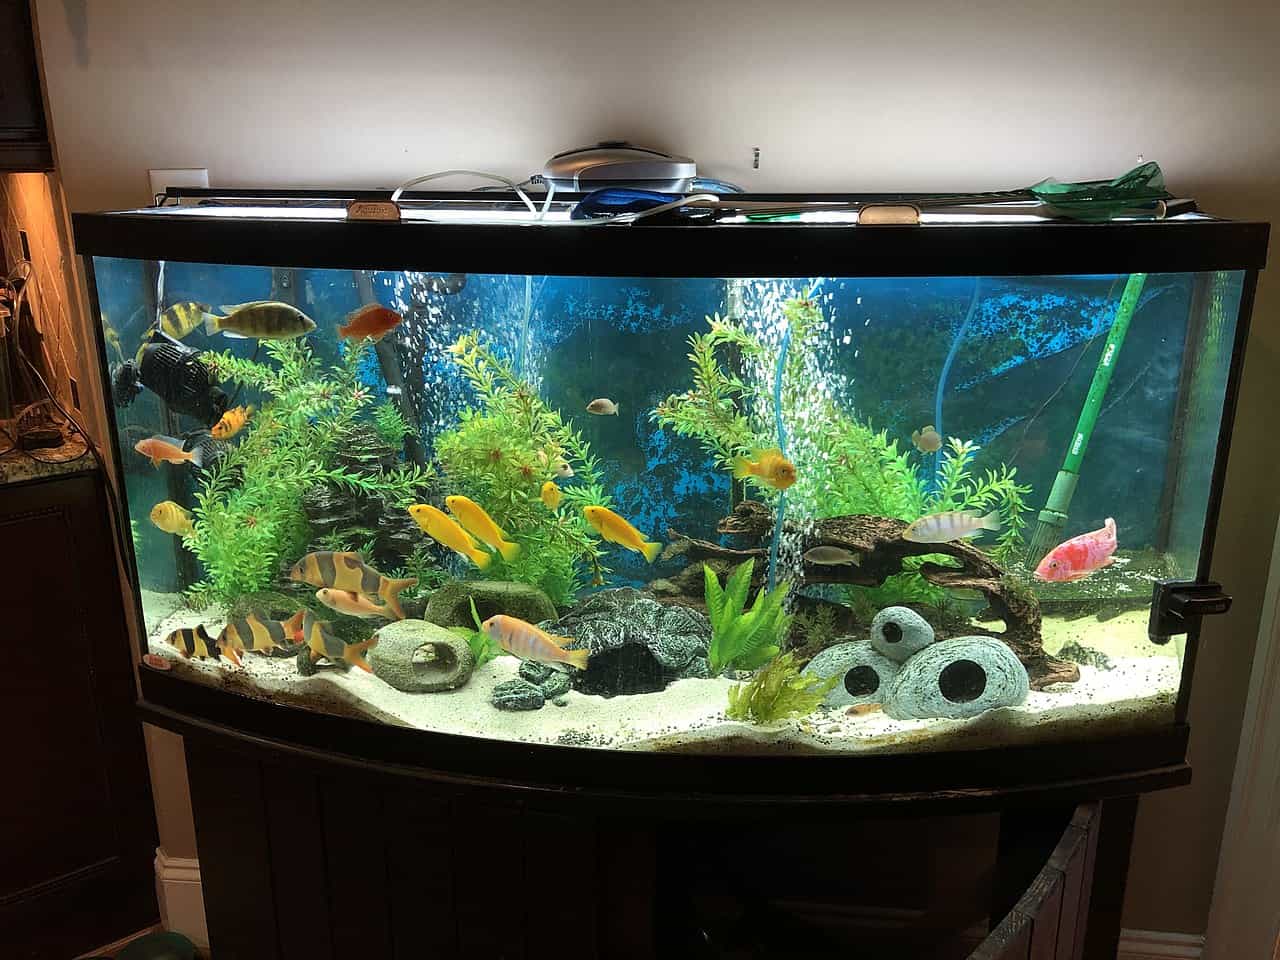 Vacation Care for Fish - Fish Vet